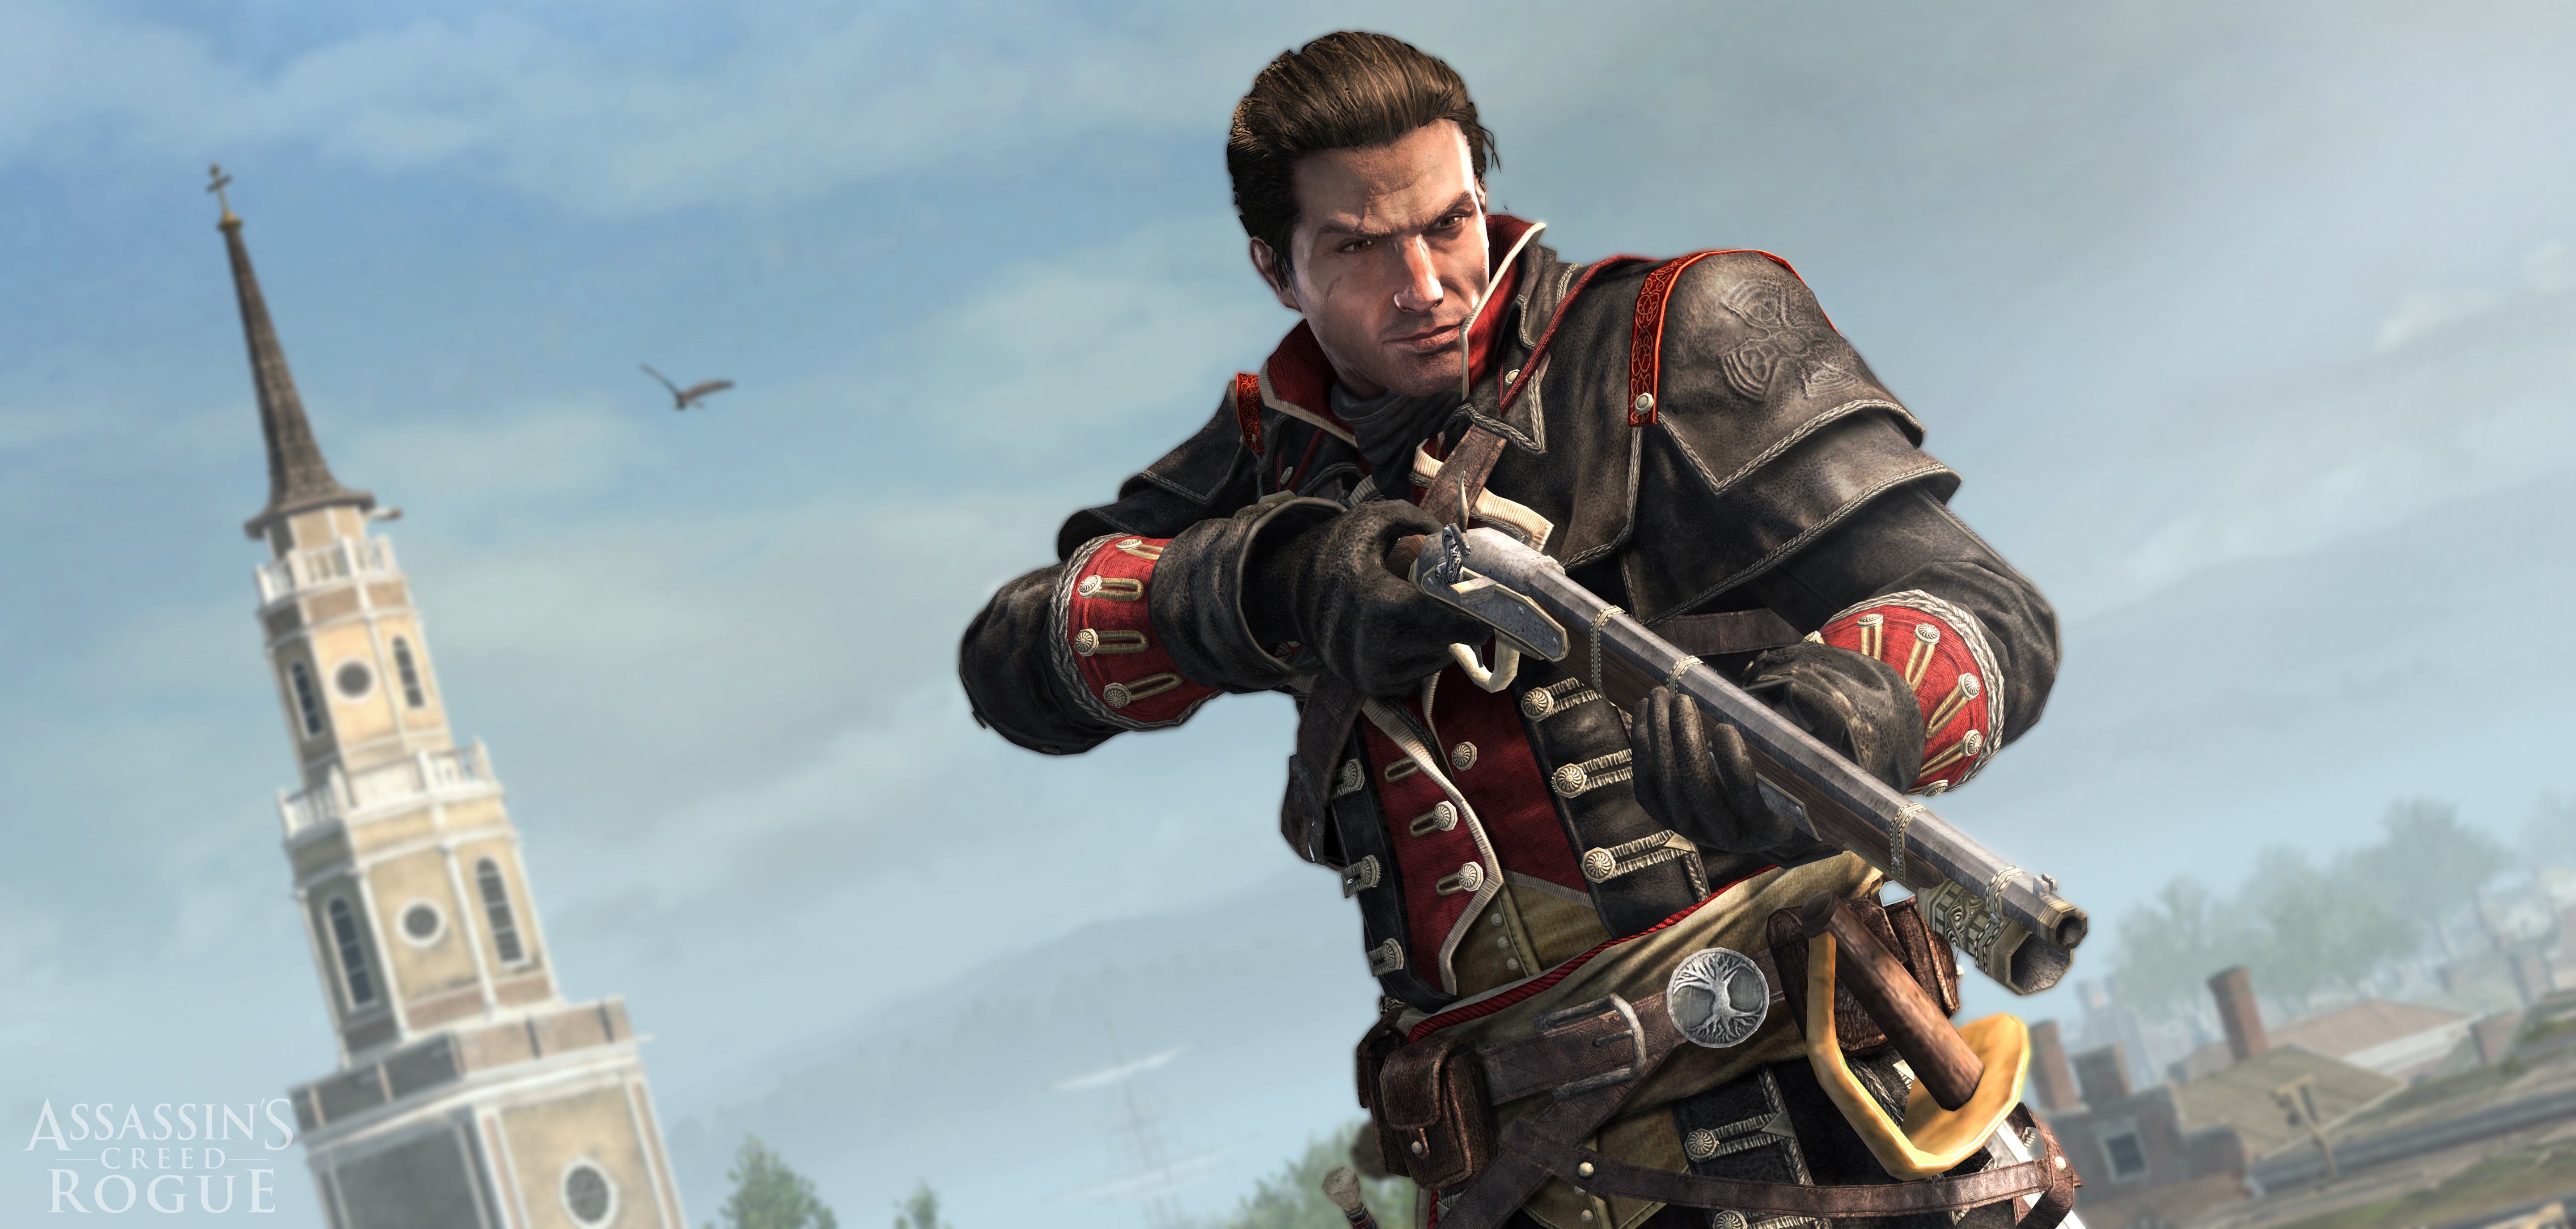 General 5760x2748 Assassin's Creed Assassin's Creed: Rogue video game characters men video game men weapon PC gaming video games